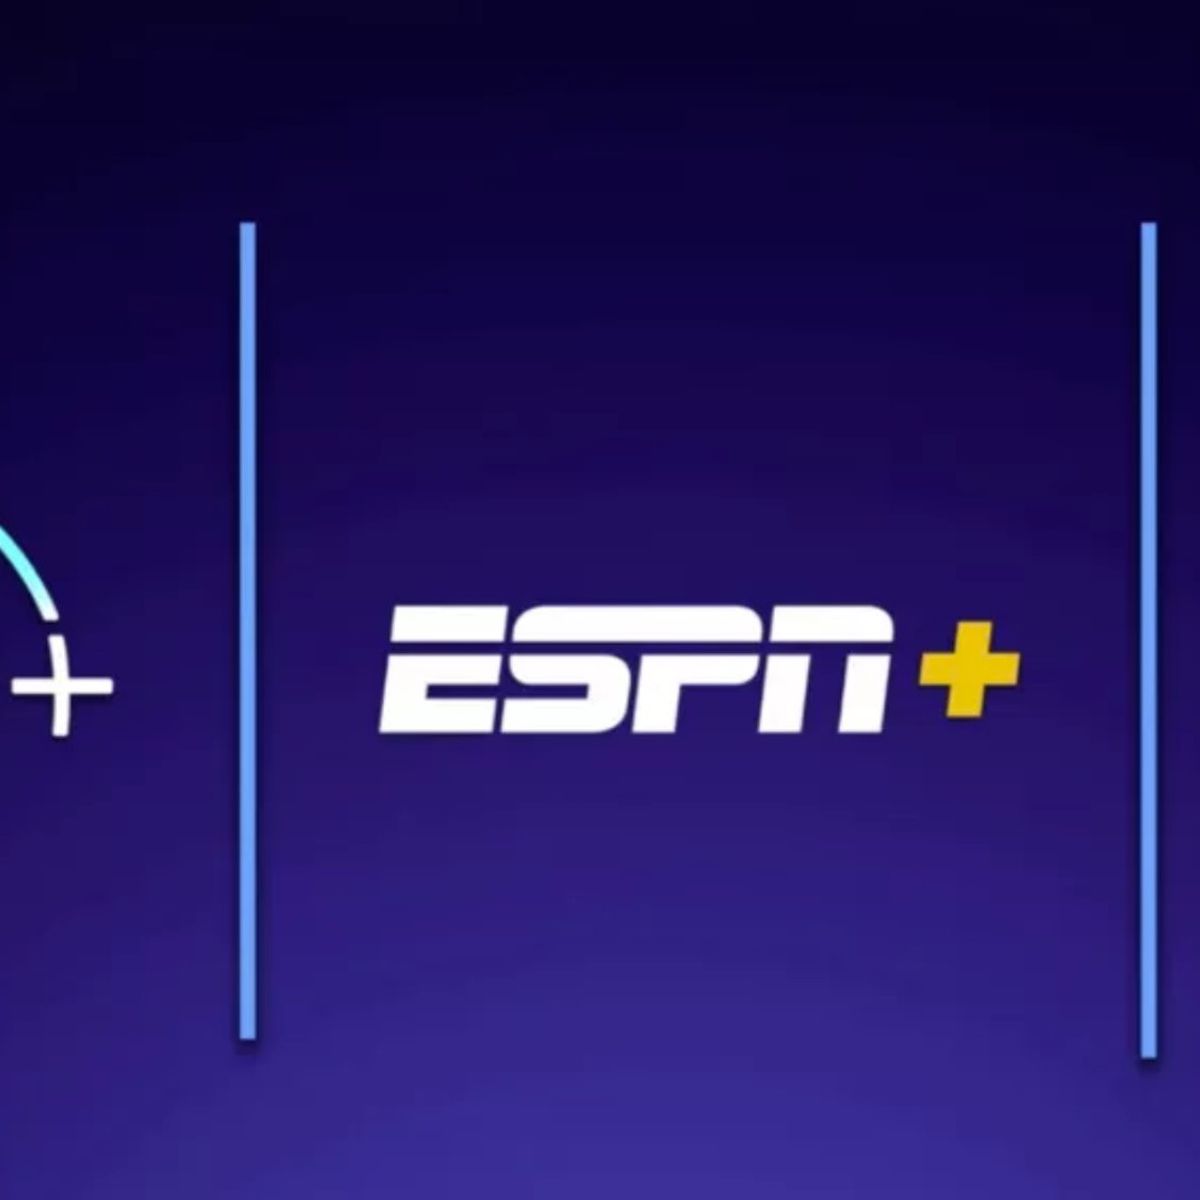 A side-by-side image of the Disney Plus, ESPN Plus, and Hulu logos